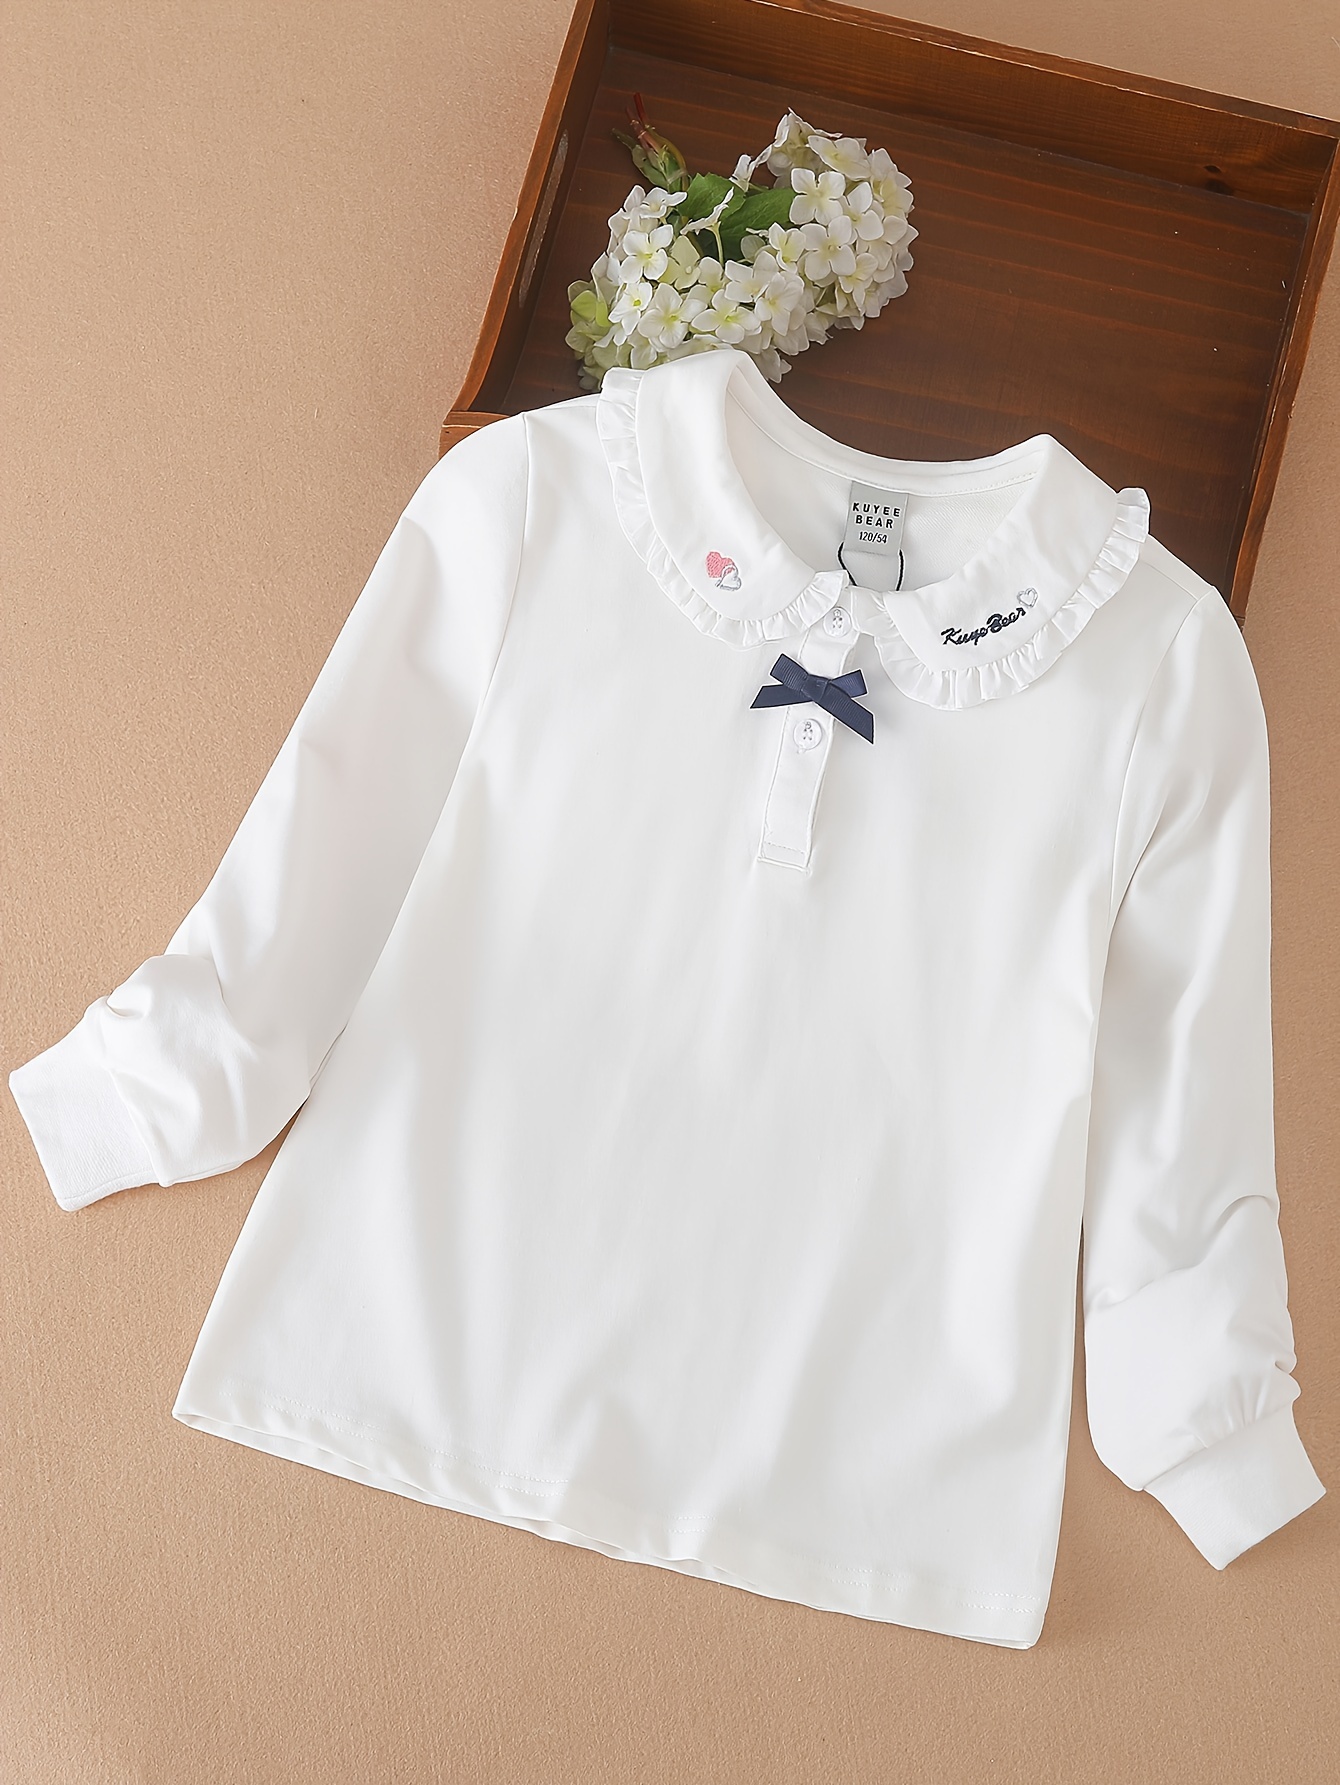 3pcs Girls All-match Solid Long Sleeve Undershirts, Toddler's Crew Neck  Casual T-shirts Blouses